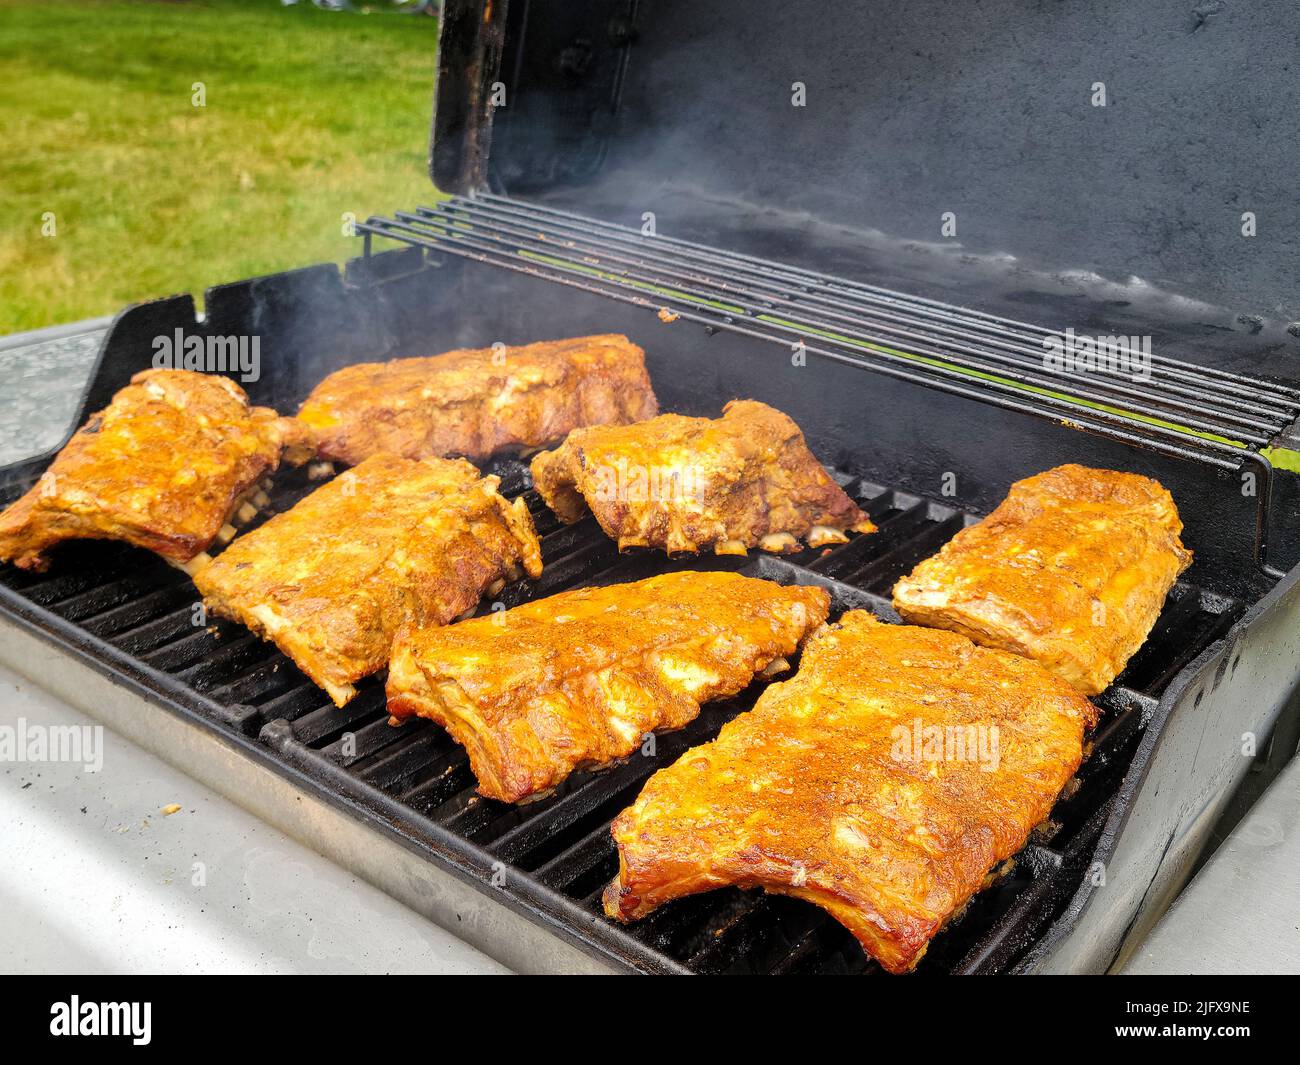 Ribs with dry rub seasoning cooking on an outdoor barbecue grill Stock Photo